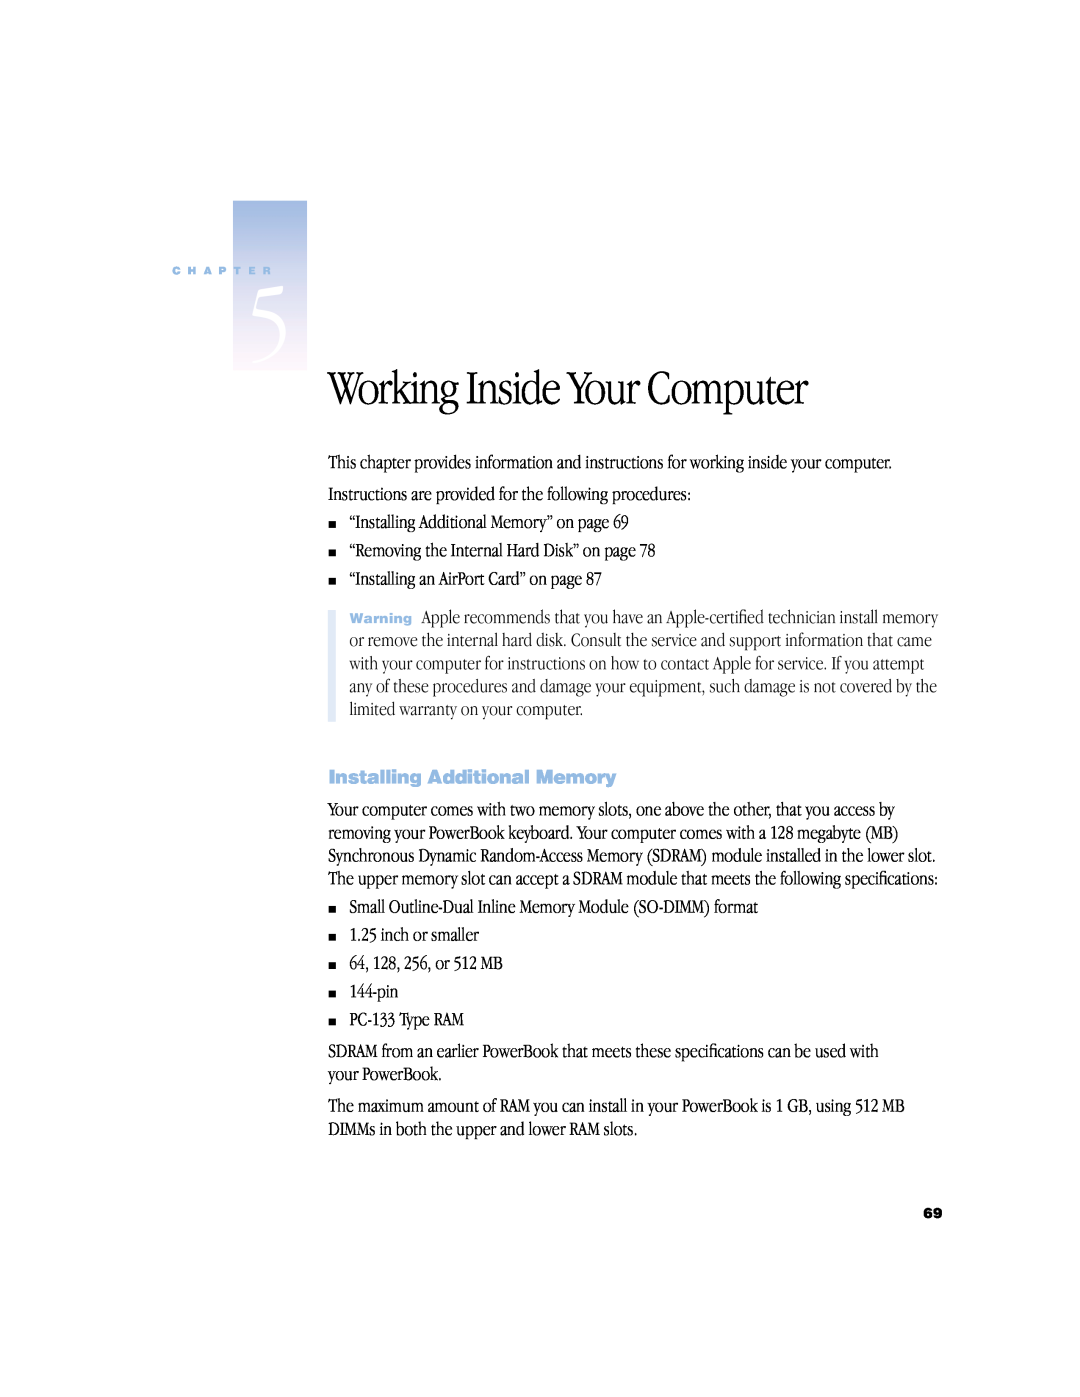 Apple powerbook g4 manual Working Inside Your Computer, Installing Additional Memory 